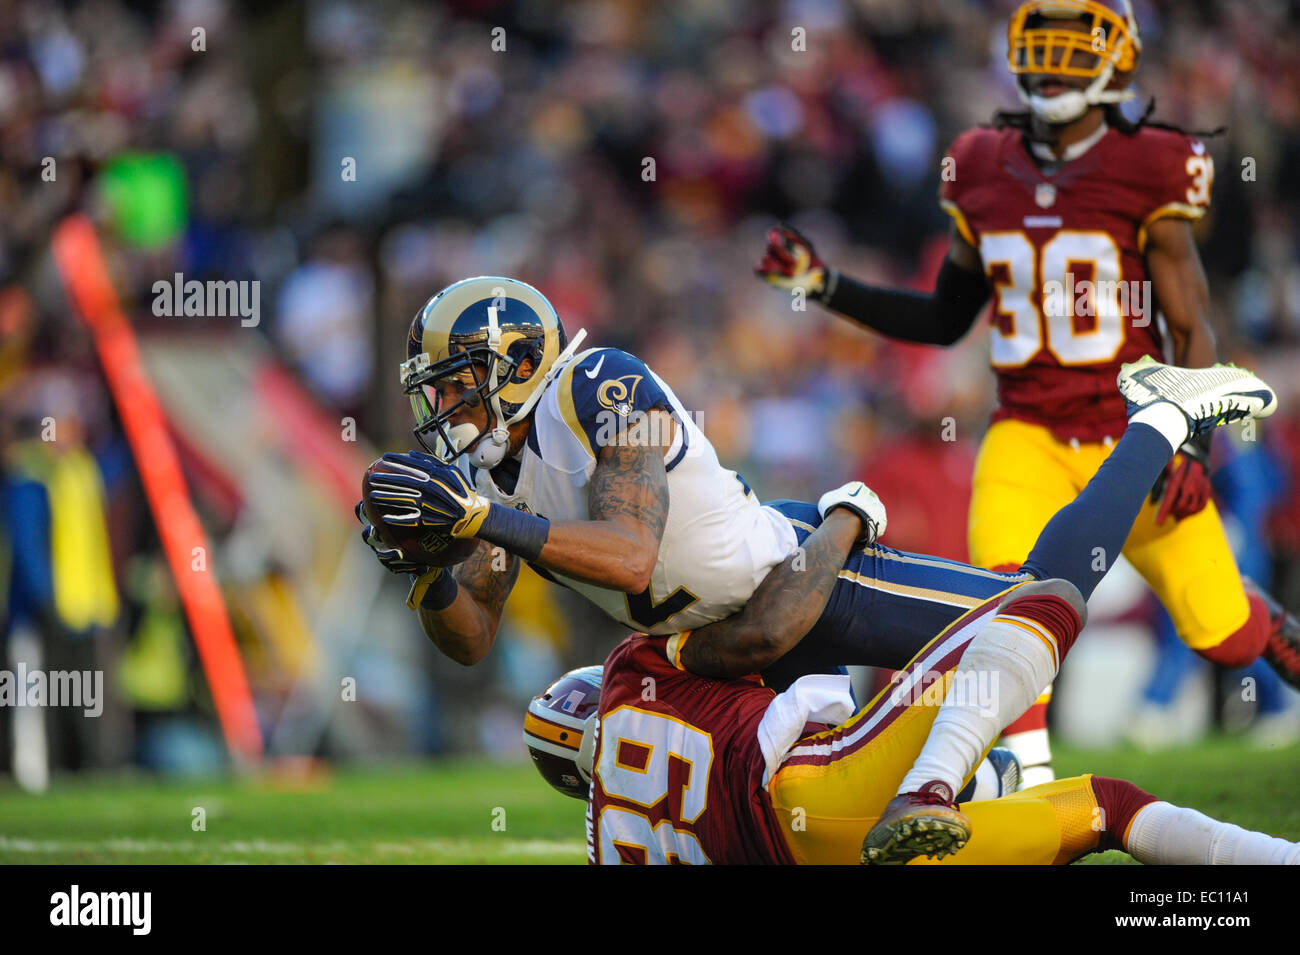 Landover, Maryland, USA. 07th Dec, 2014. Washington Redskins cornerback David Amerson (39) tries to tackle St. Louis Rams wide receiver Stedman Bailey (12) during the matchup between the St. Louis Rams and the Washington Redskins at FedEx Field in Landover, MD. Credit:  Cal Sport Media/Alamy Live News Stock Photo